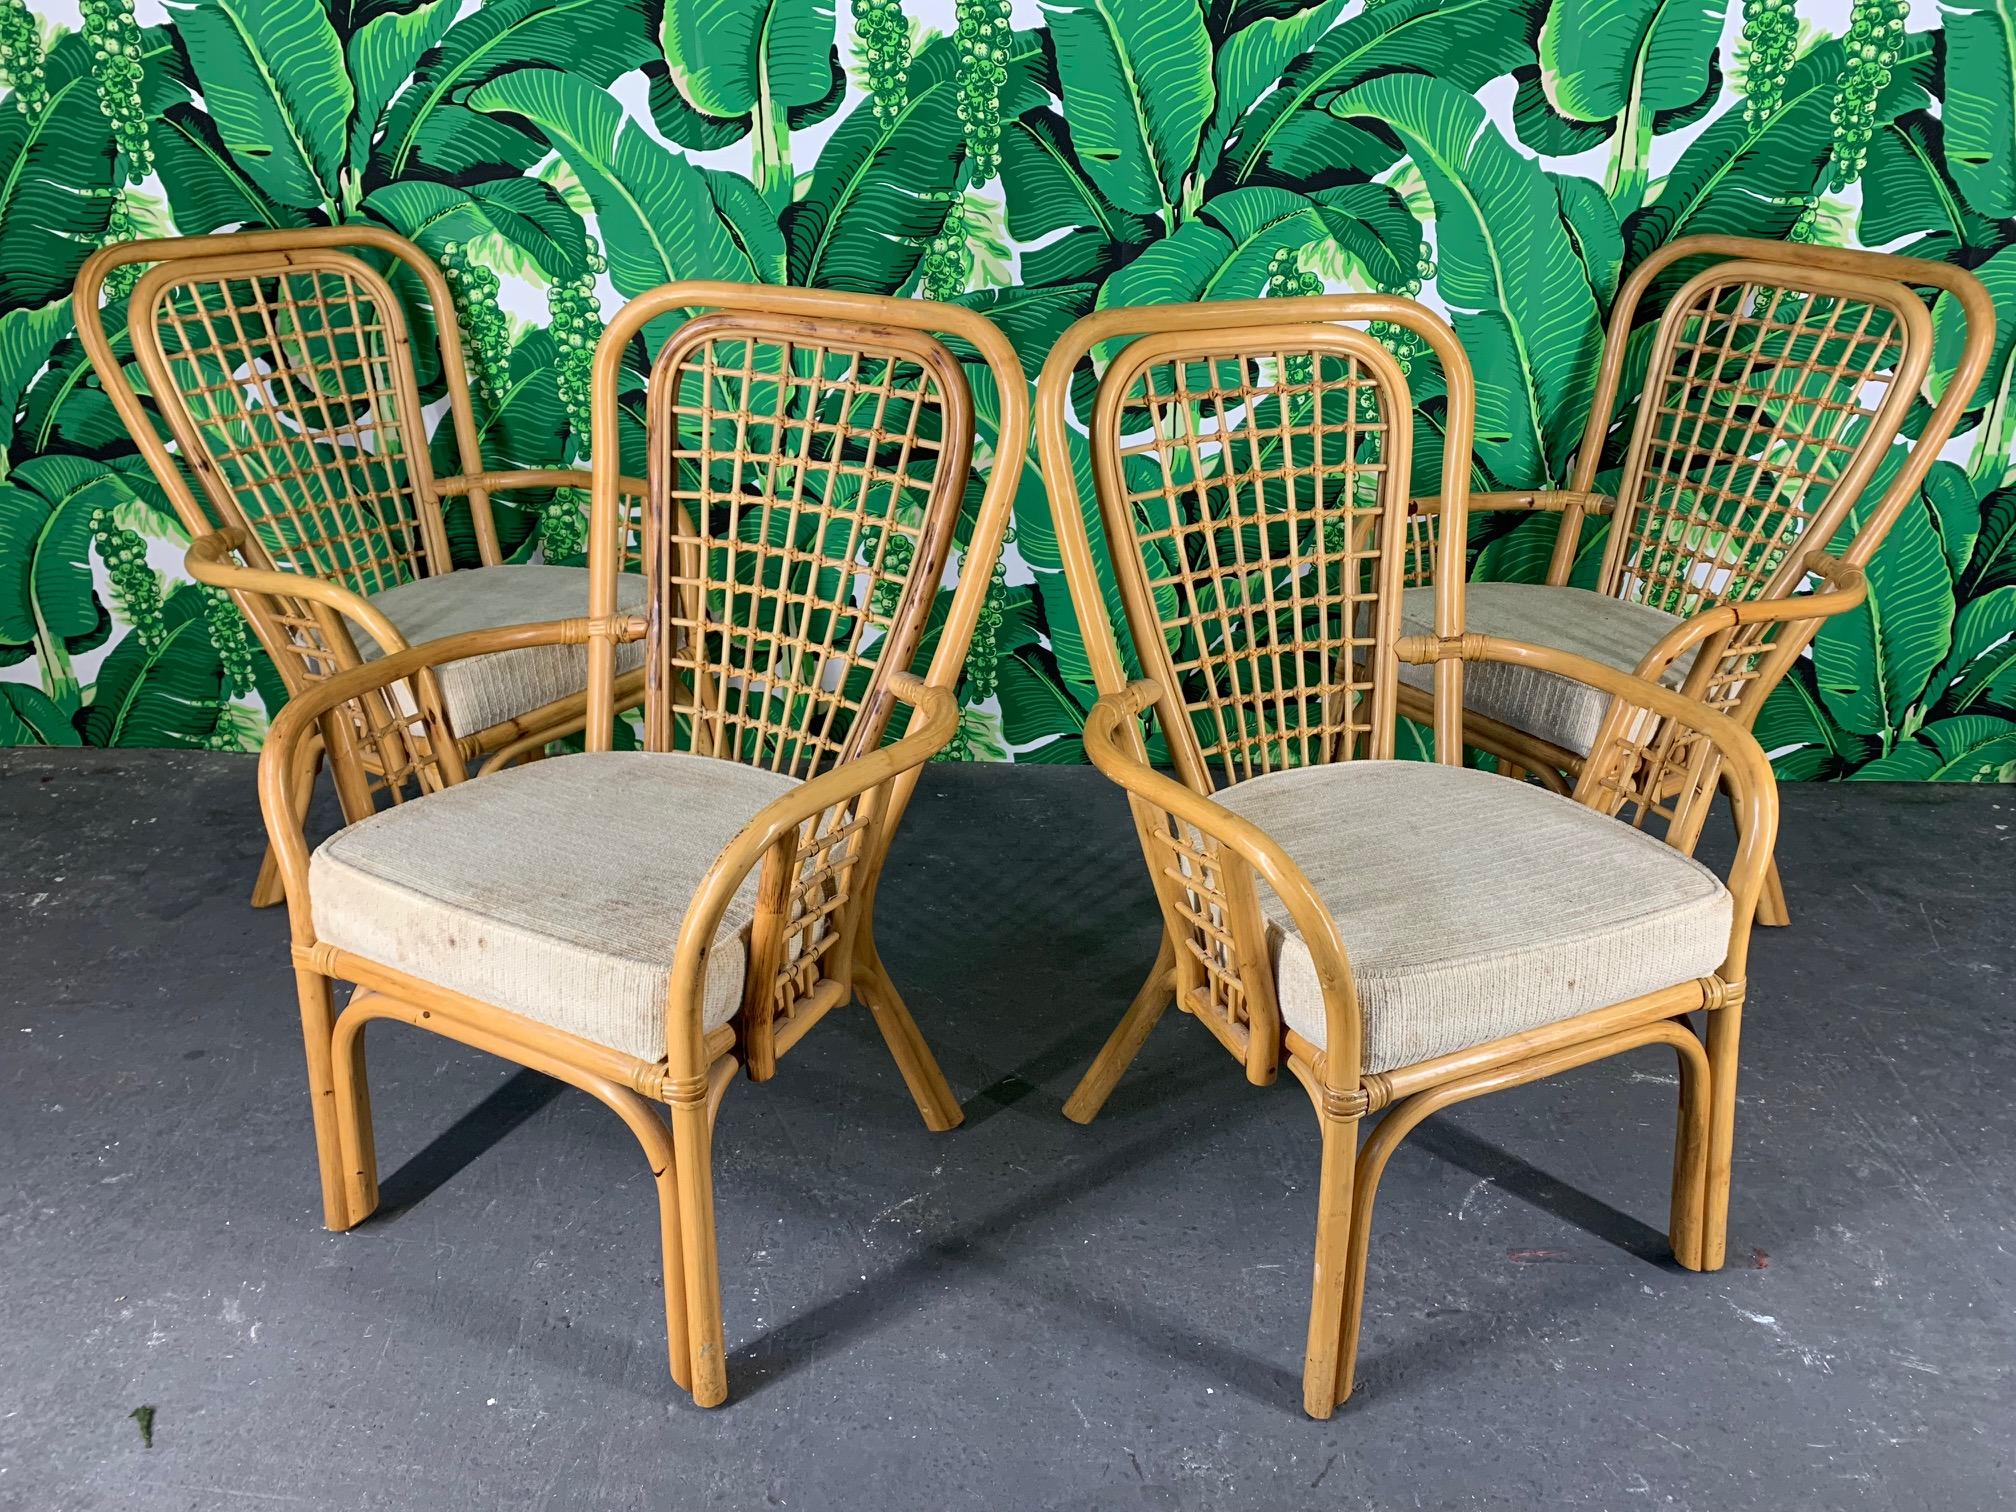 Set of 4 rattan dining chairs by Vogue Rattan feature a fan back design and thick, upholstered seats. Very good vintage condition with only minor signs of age appropriate wear.